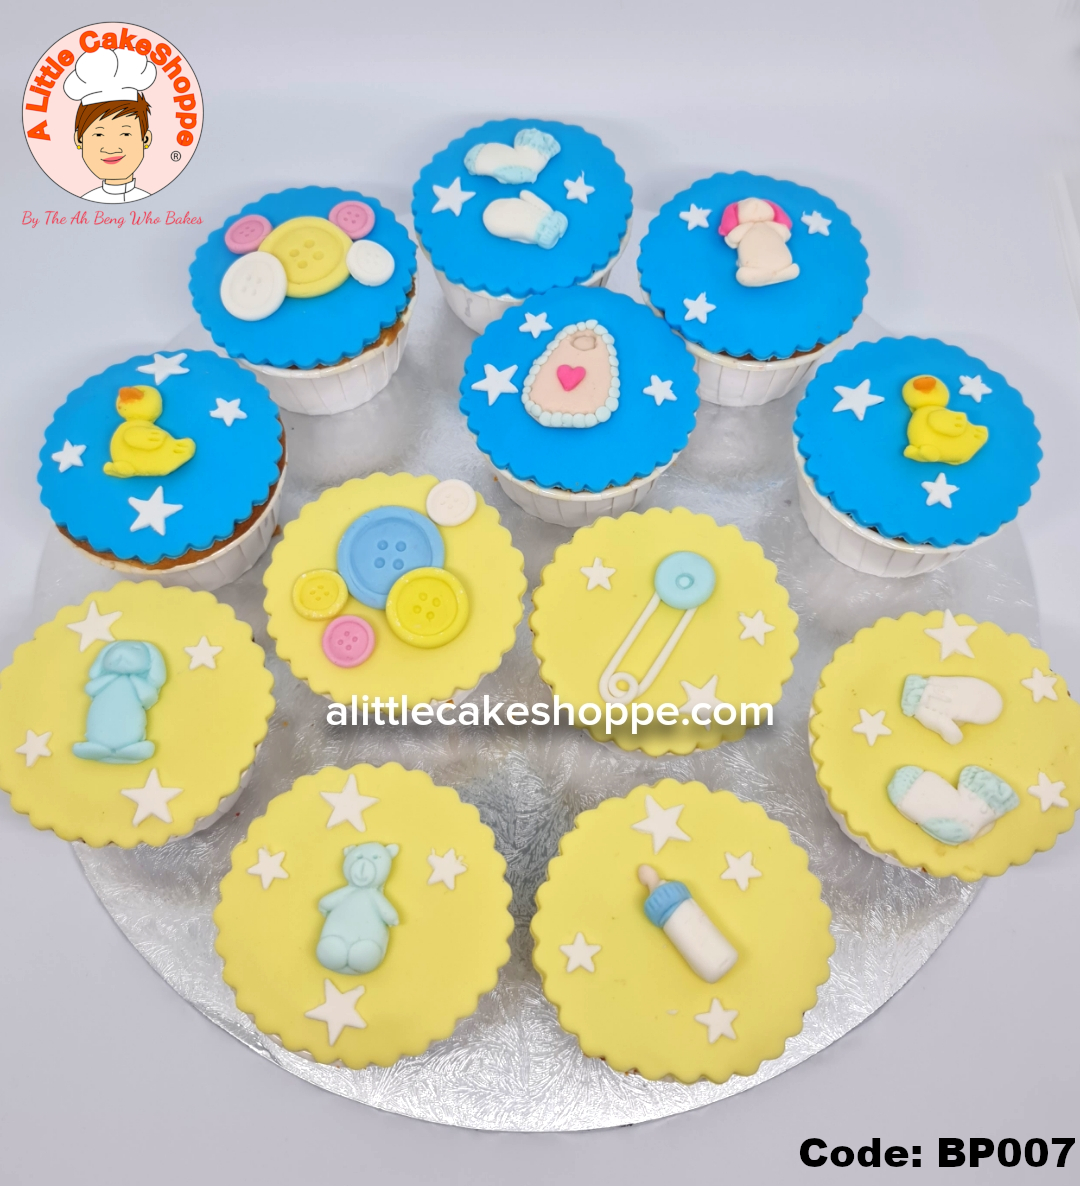 Best Cake Shop Singapore Delivery Best Customised Cake Shop Singapore customise cake custom cake 2D 3D birthday cake cupcakes desserts wedding corporate events anniversary 1st birthday 21st birthday fondant fresh cream buttercream cakes alittlecakeshoppe a little cake shoppe compliments review singapore bakers SG cake shop cakeshop ah beng who bakes sgbakes novelty cakes sgcakes licensed sfa nea cake delivery celebration cakes kids birthday cake surprise cake adult children parenting baby full month cupcakes